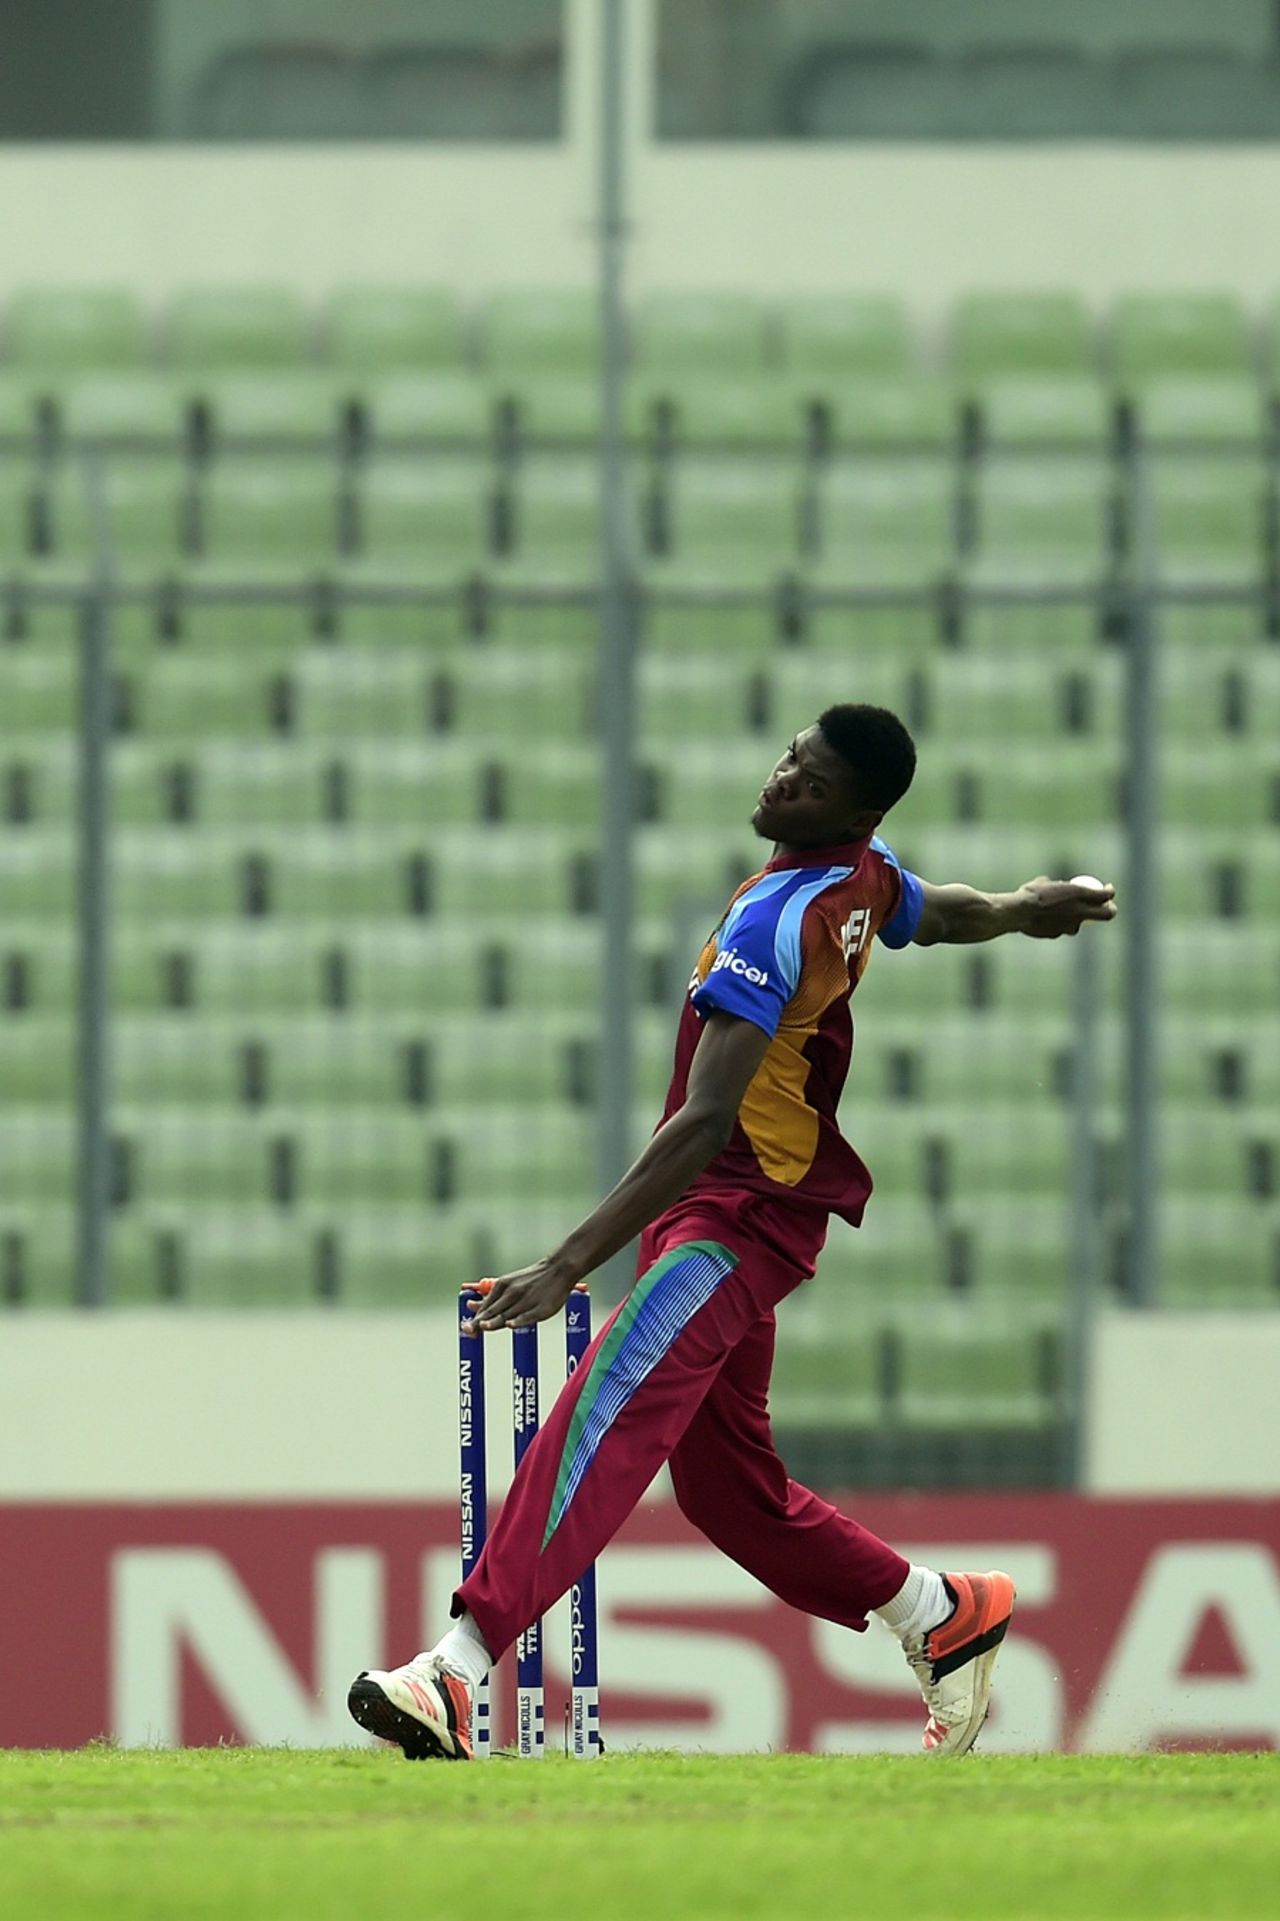 Alzarri Joseph in his delivery stride, India v West Indies, final, Under-19 World Cup, February 14, 2016